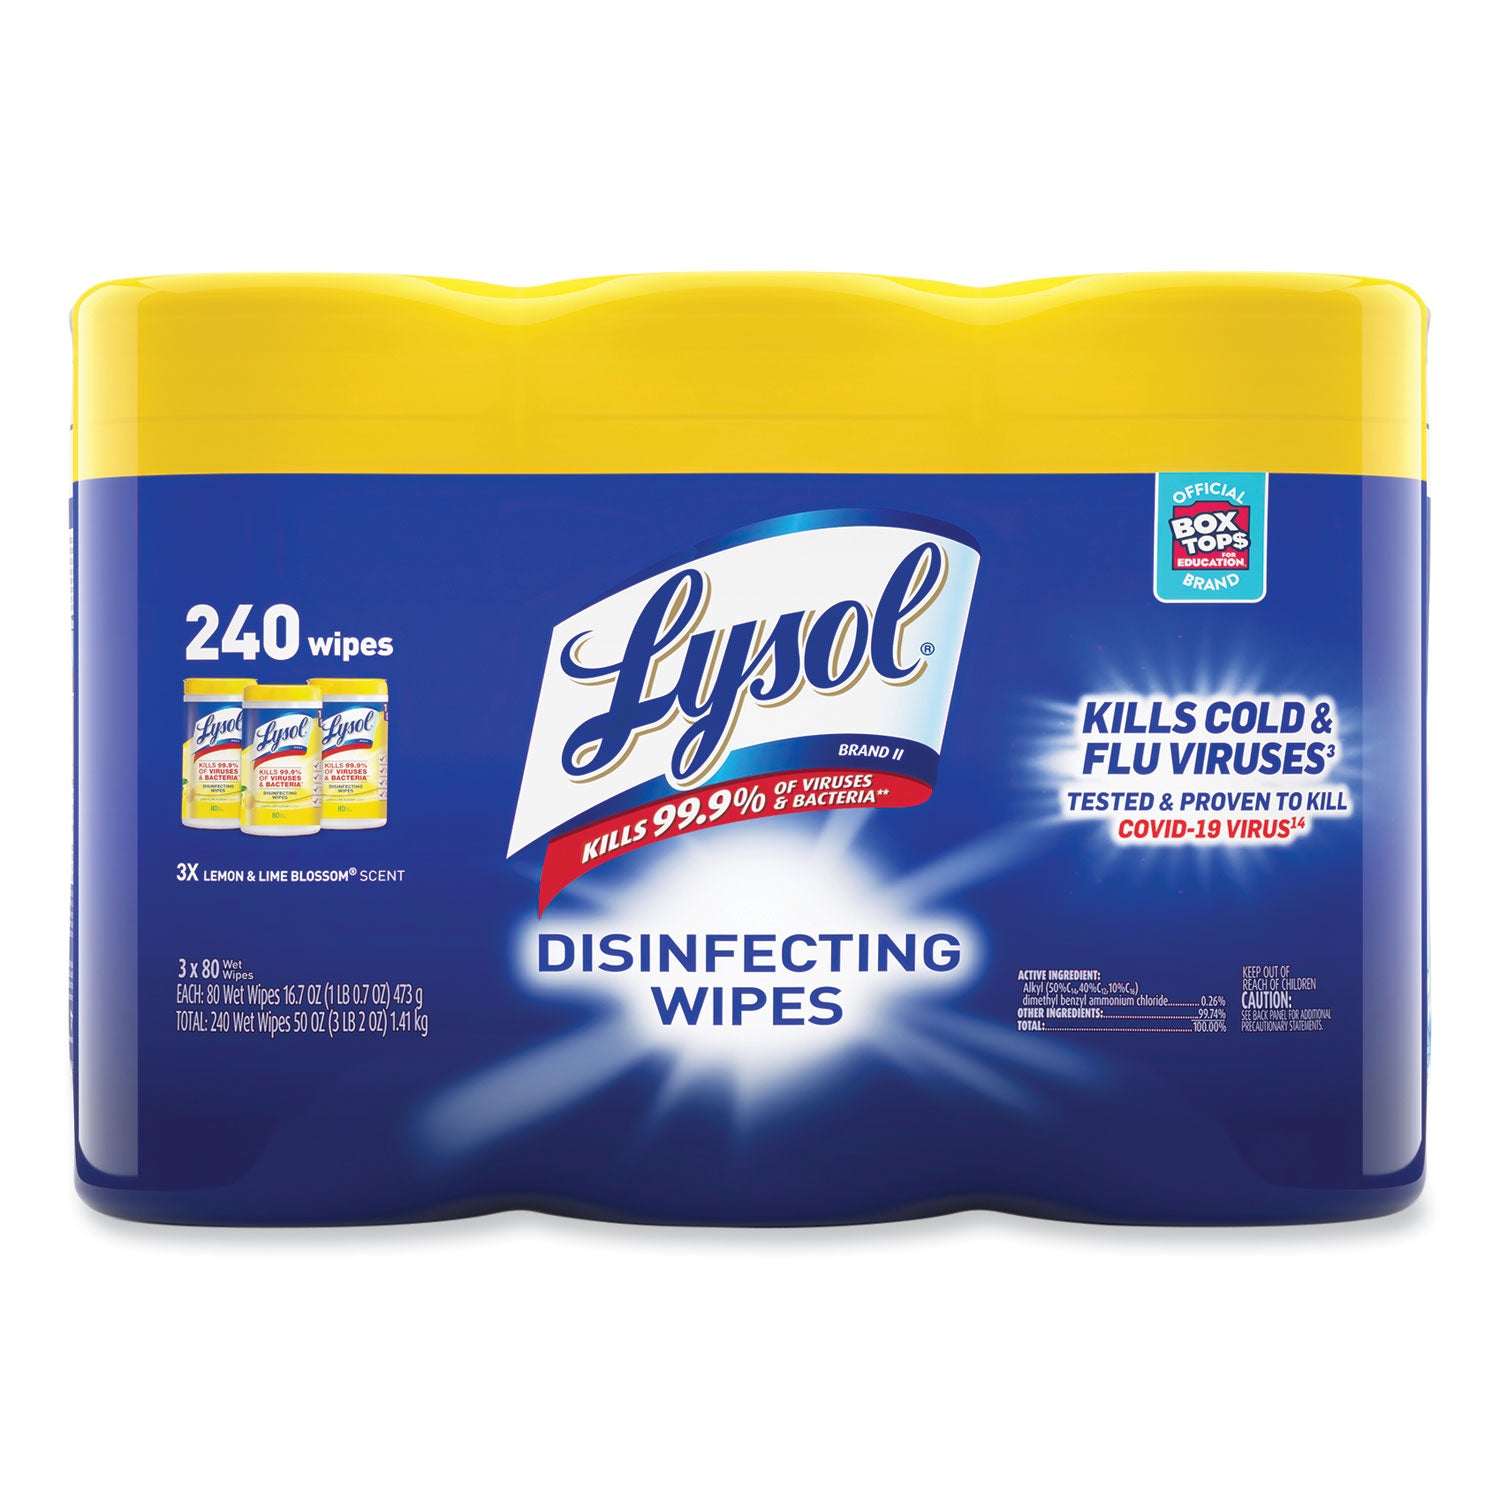 disinfecting-wipes-1-ply-7-x-725-lemon-and-lime-blossom-white-80-wipes-canister-3-canisters-pack_rac84251pk - 1